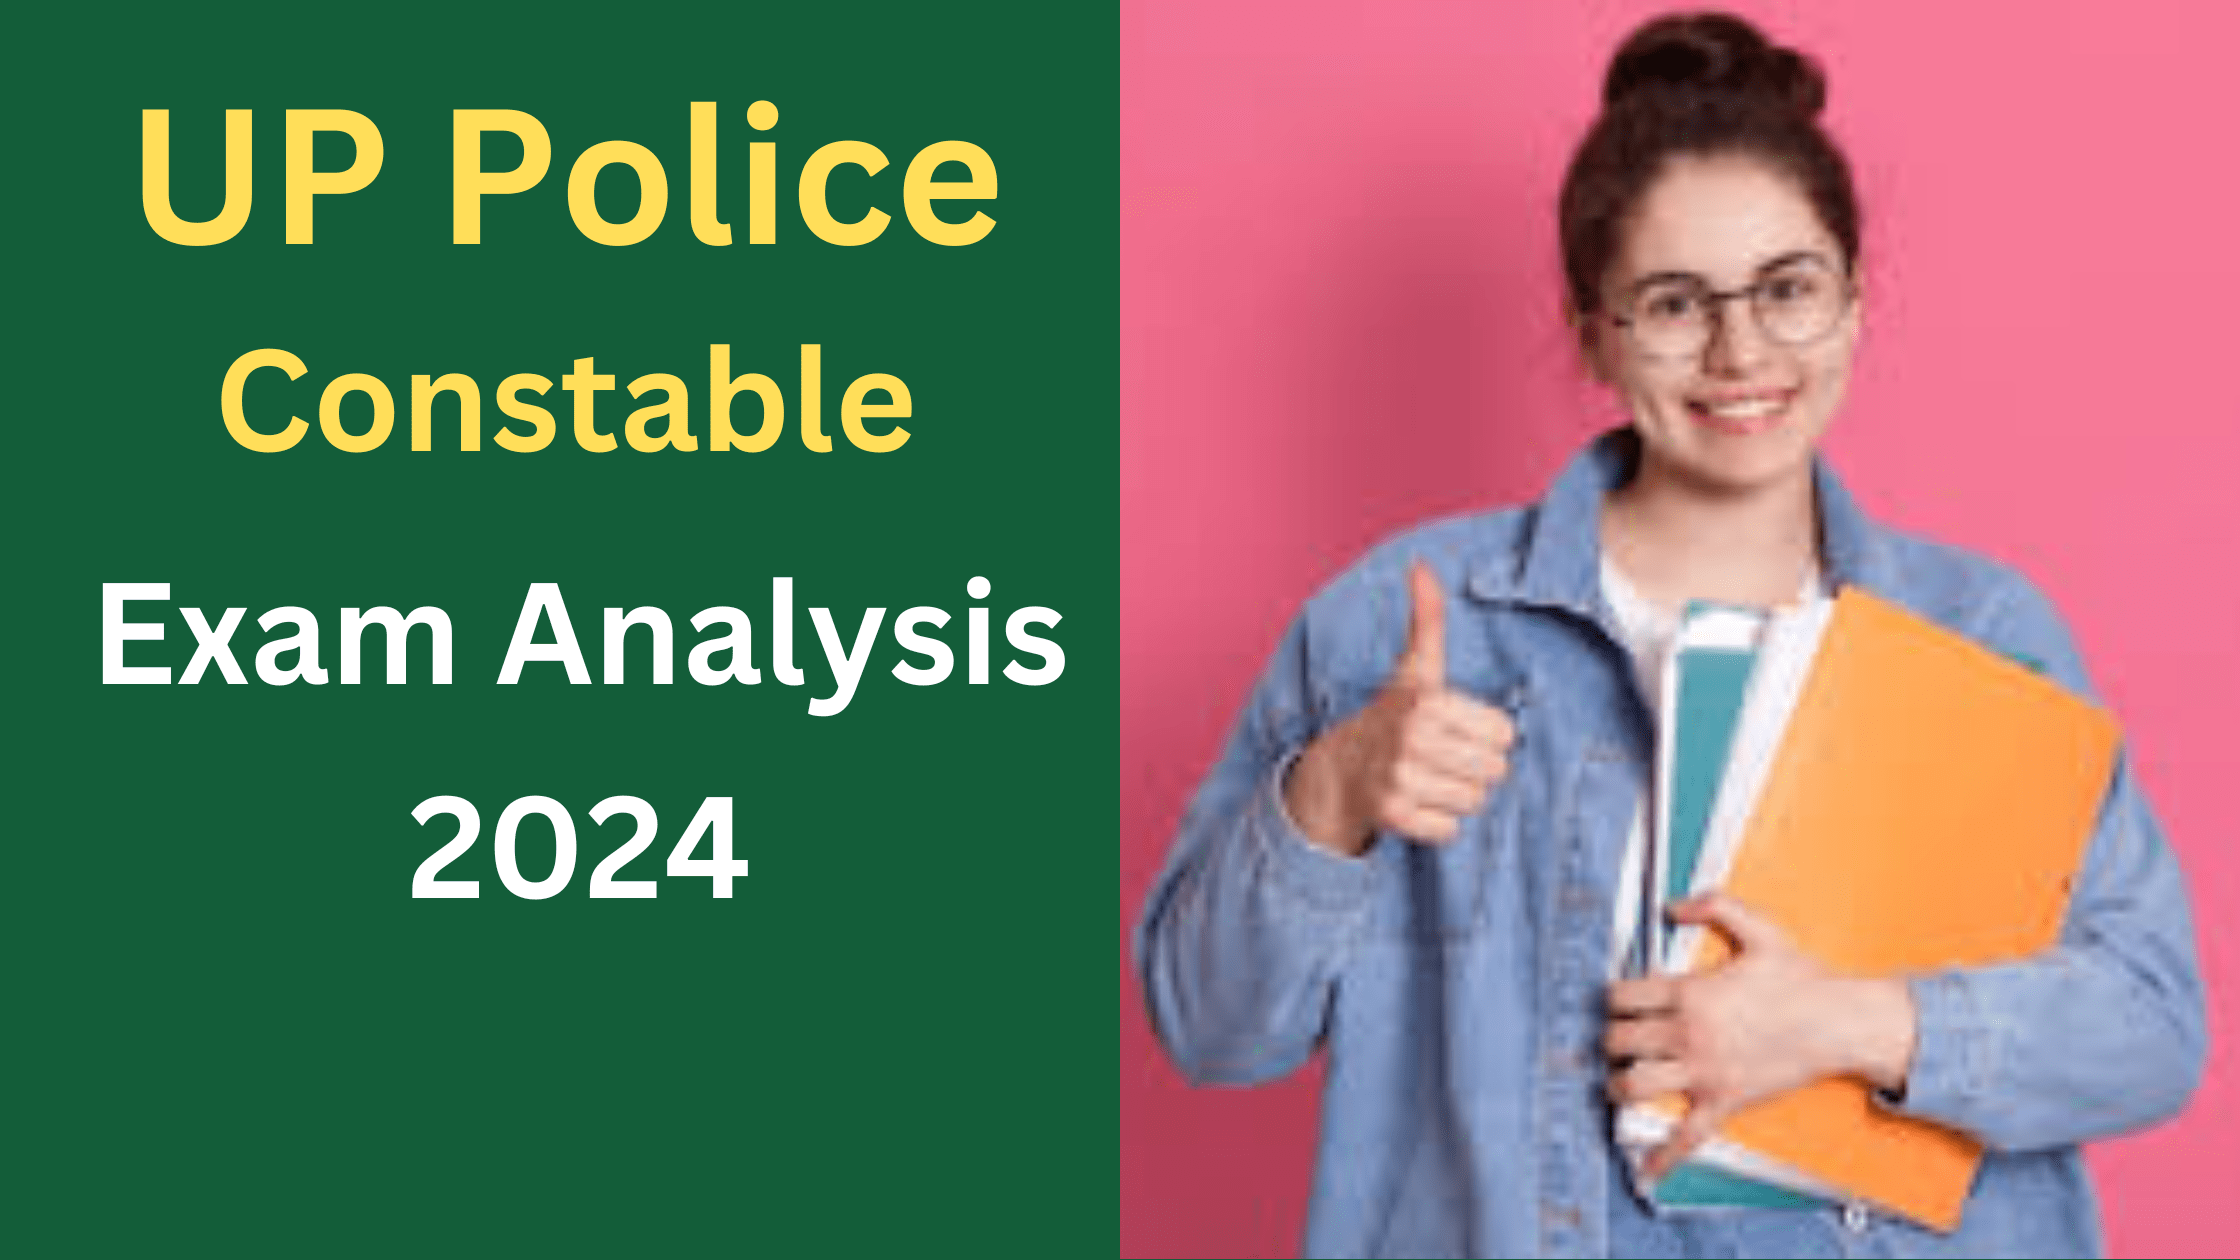 UP Police Constable Exam Analysis 2024